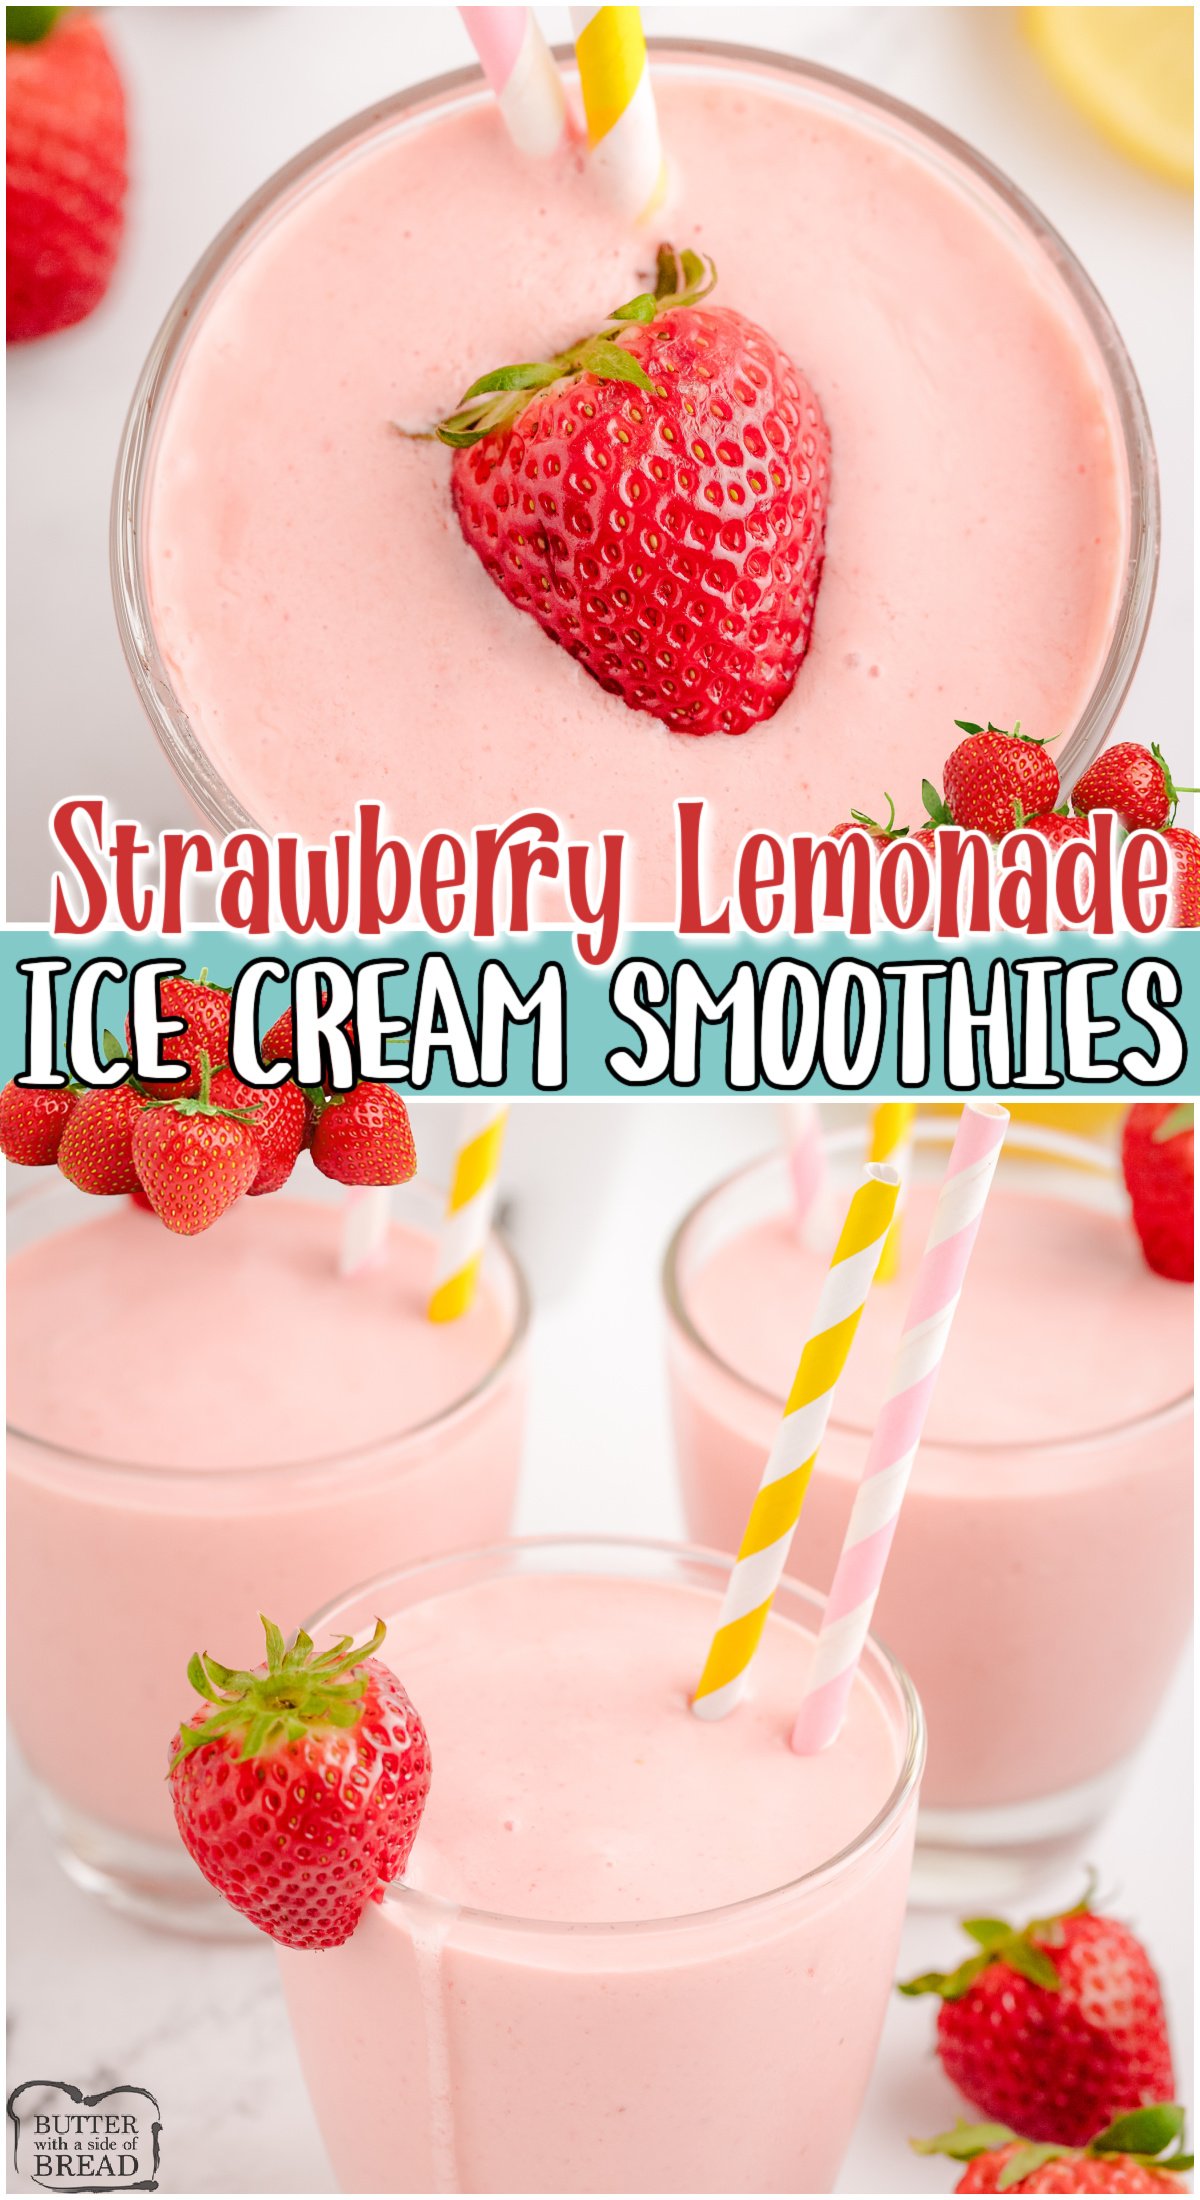 Pink Lemonade Ice Cream Smoothies are a simple 4 ingredient recipe that are perfect for hot summer days! A cross between a milkshake & a smoothie, these sweet treats are refreshing & delicious! 